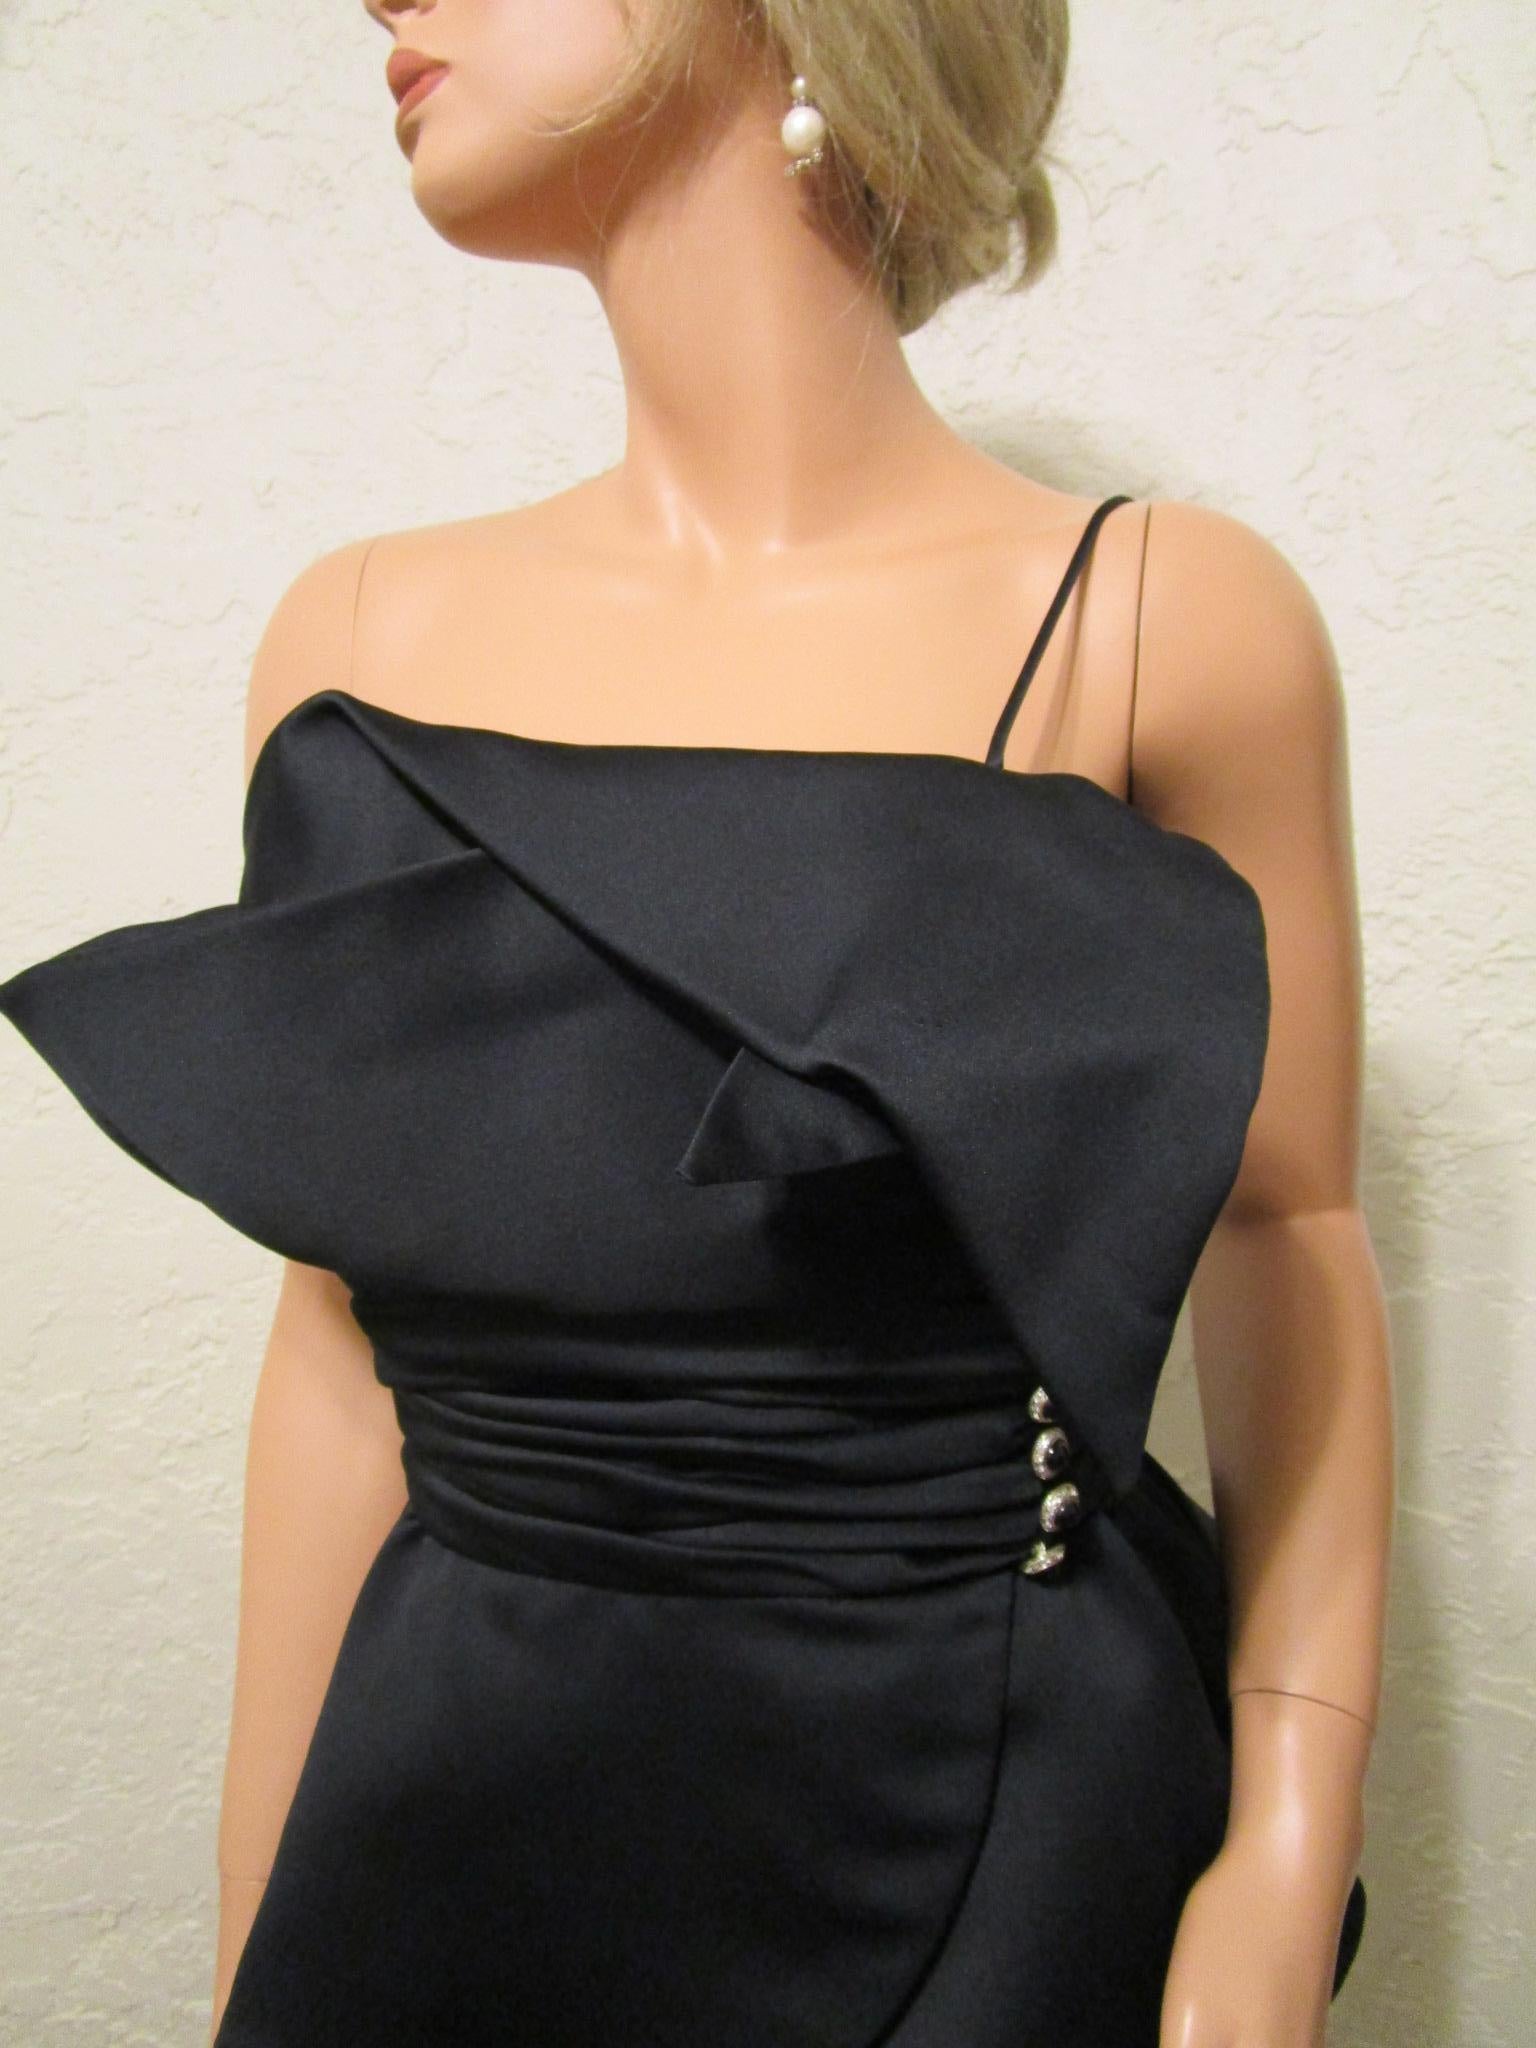 Women's VICTOR COSTA Black Cocktail Dress One Shoulder Lord & Taylor 1980s 